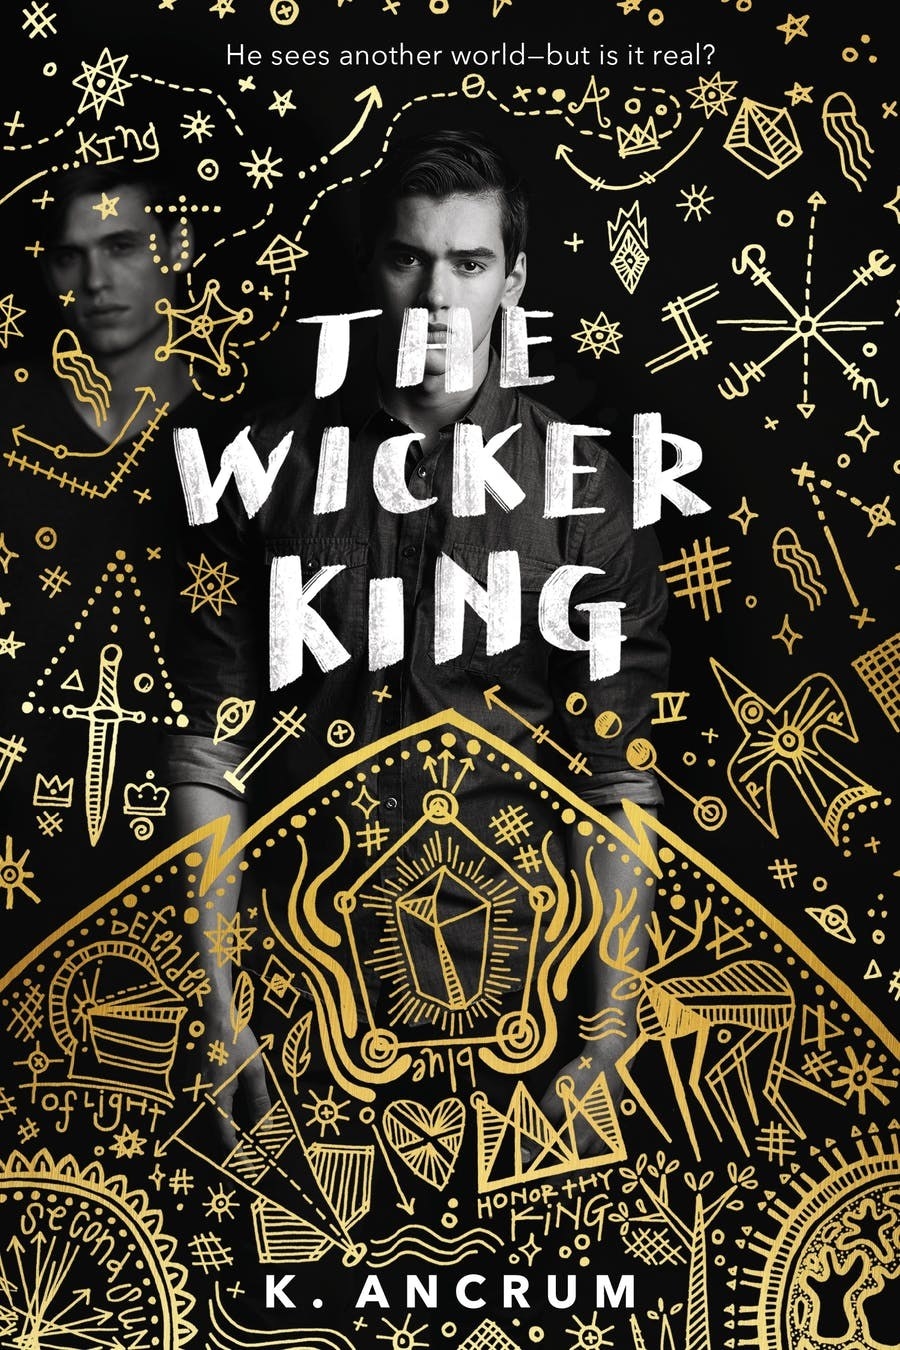 Portrait of a guy against a black backdrop with yellow illustrations imposed on the photo for the book cover of The Wicker King by K. Ancrum